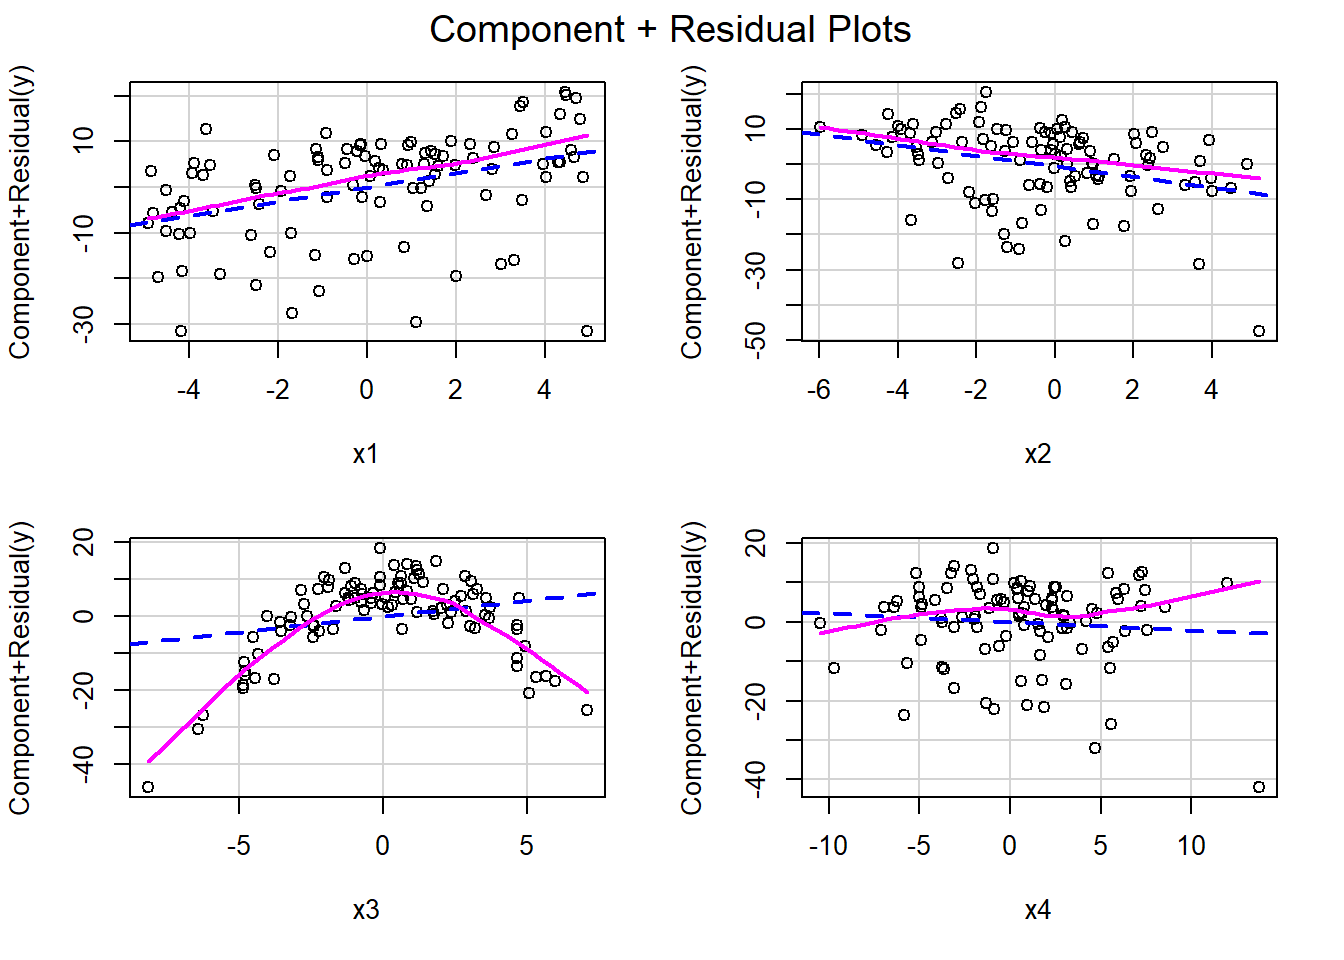 Component + residual plots constructed using the partialr data set in the Data4Ecologists package (Fieberg, 2021) calculated using the crPlots function in the car package (Fox & Weisberg, 2019).